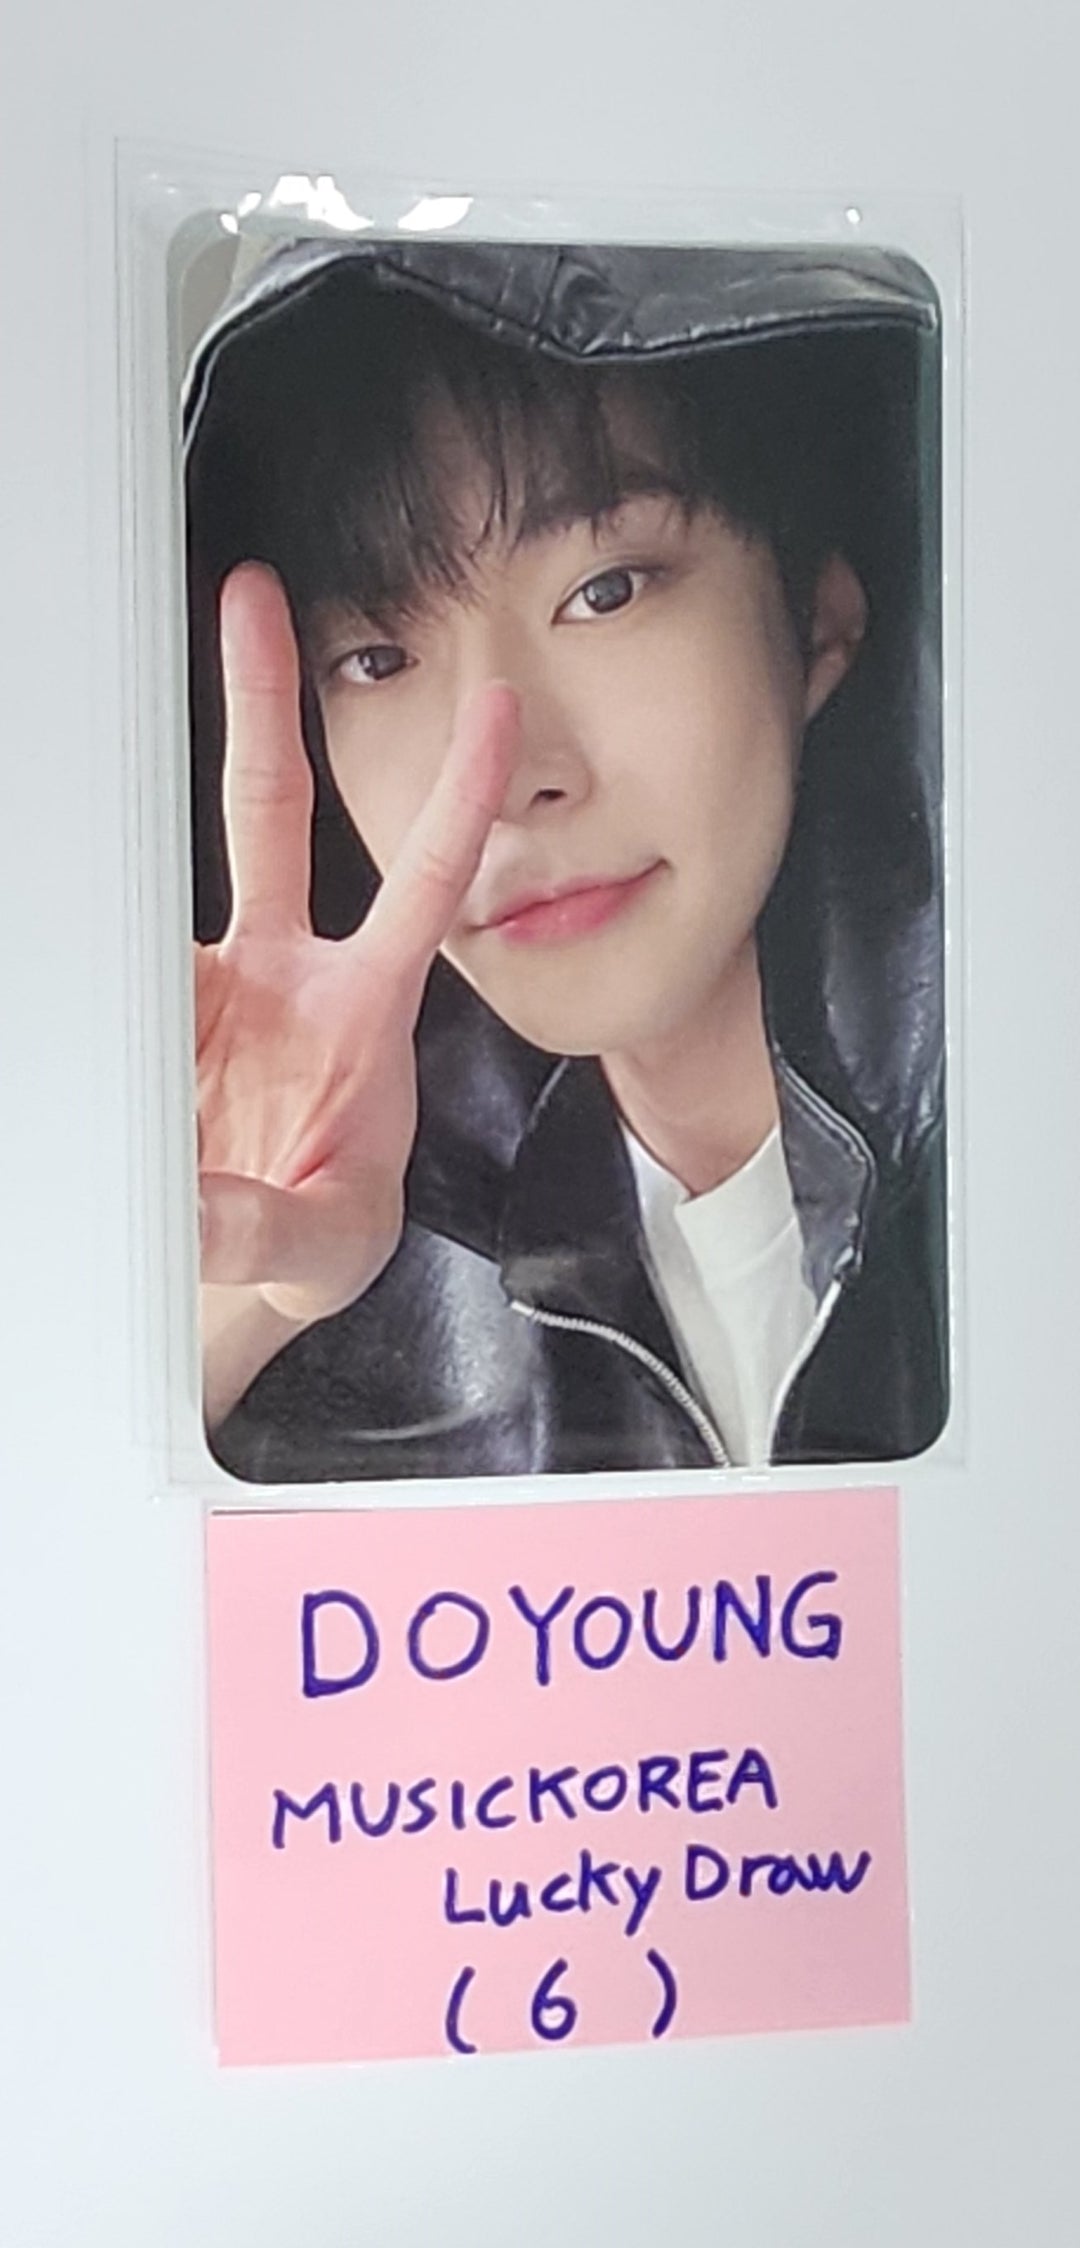 DOYOUNG (Of NCT) "YOUTH" - Music Korea Lucky Draw Event Photocard [Digipack Ver.] [24.5.7]